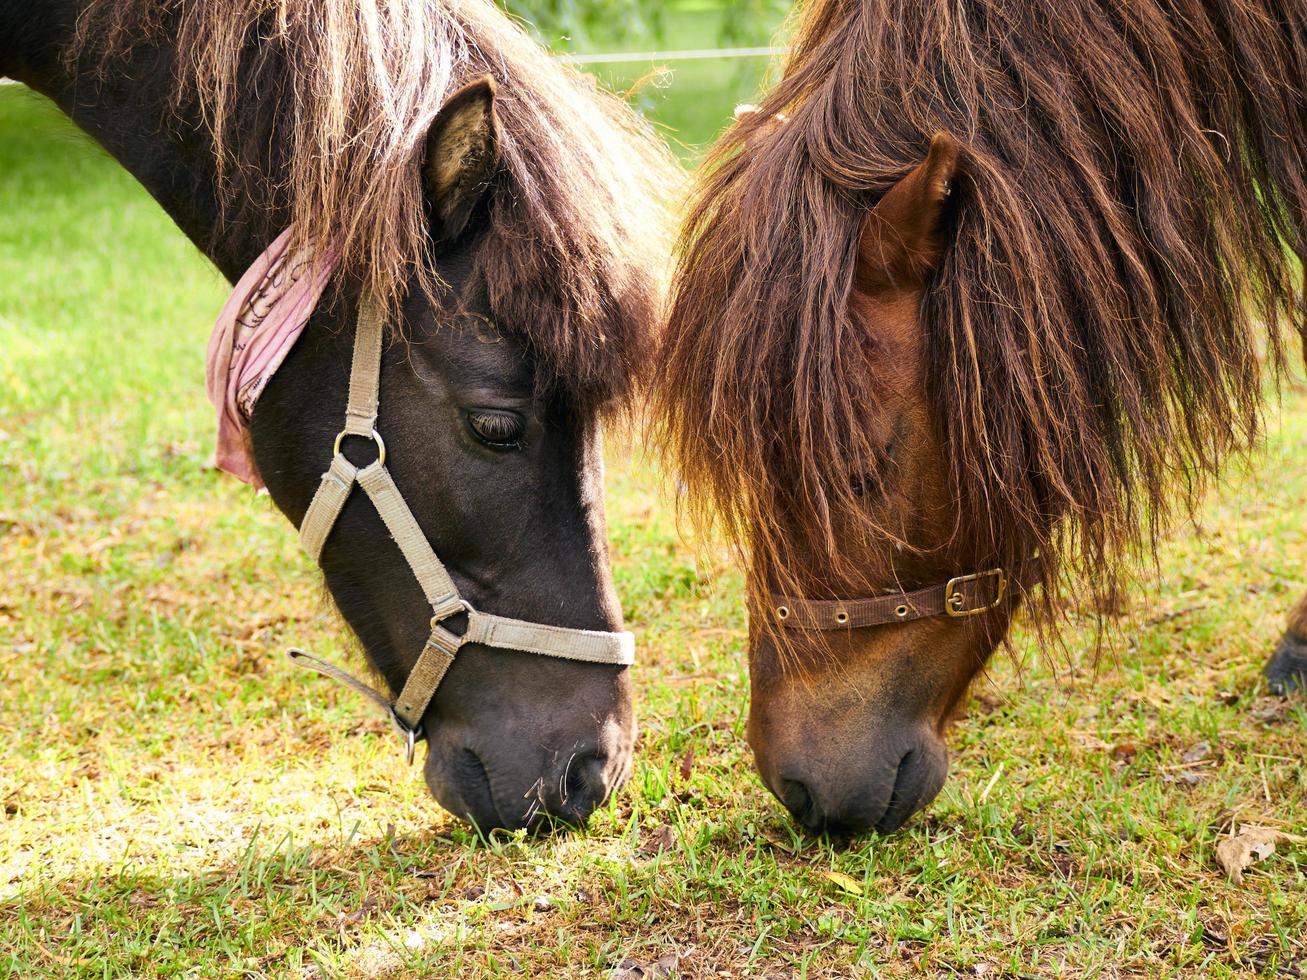 Quebec, Canada, June 14, 2015 - Two horses eating grass photo